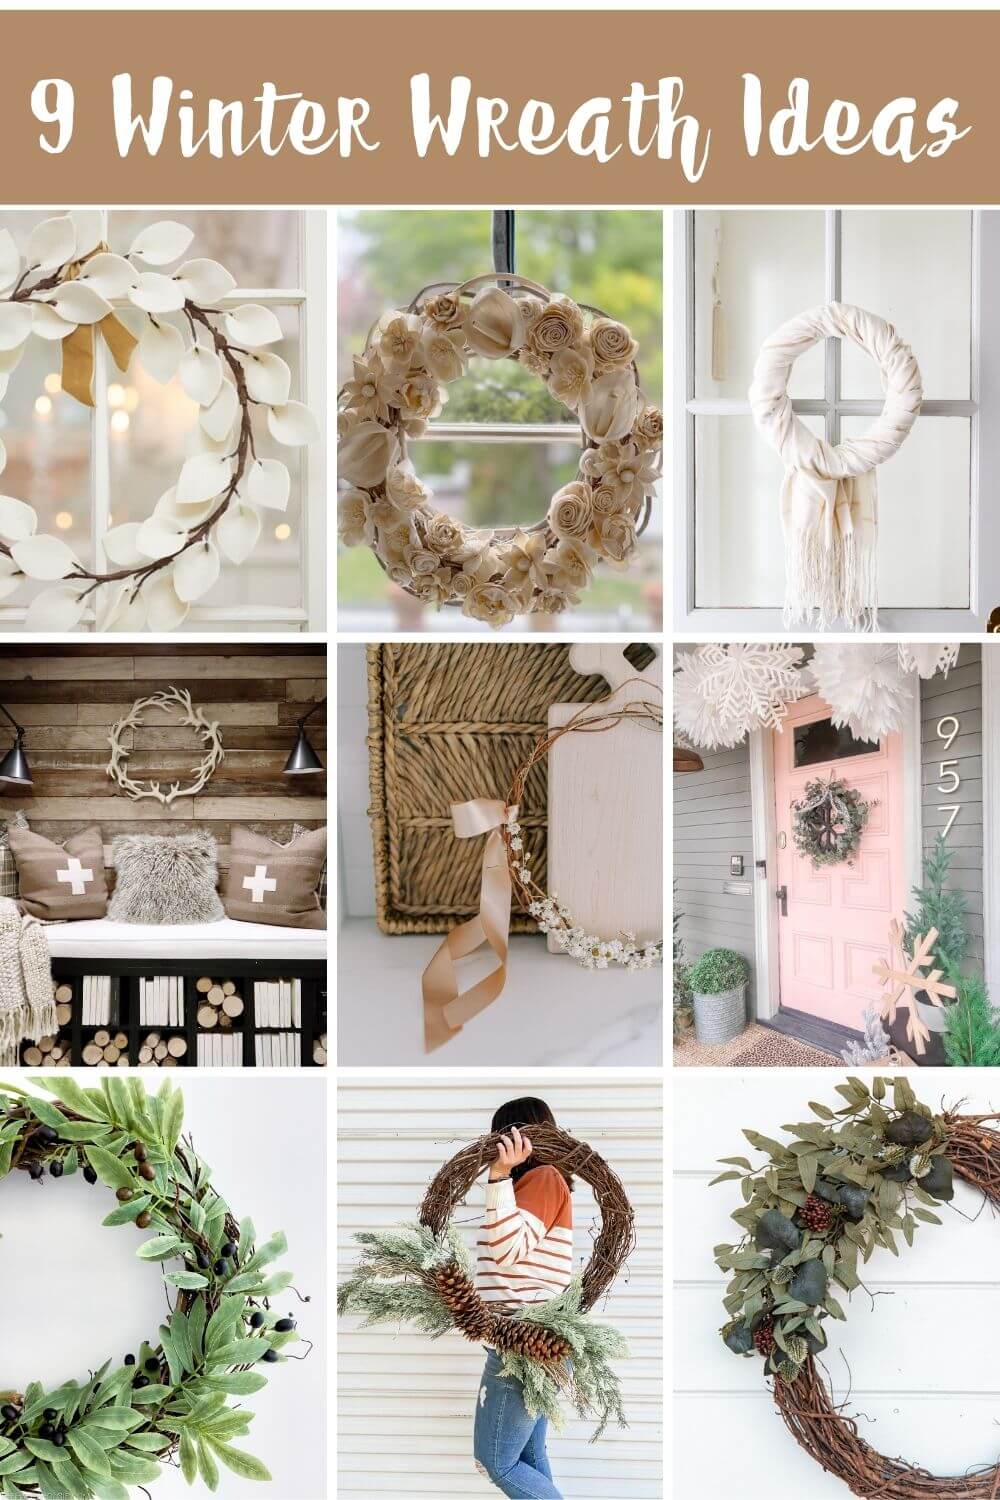 Oodles of gorgeous winter wreath ideas perfect for those cold winter days!  Get some great ideas and check out these tutorials!